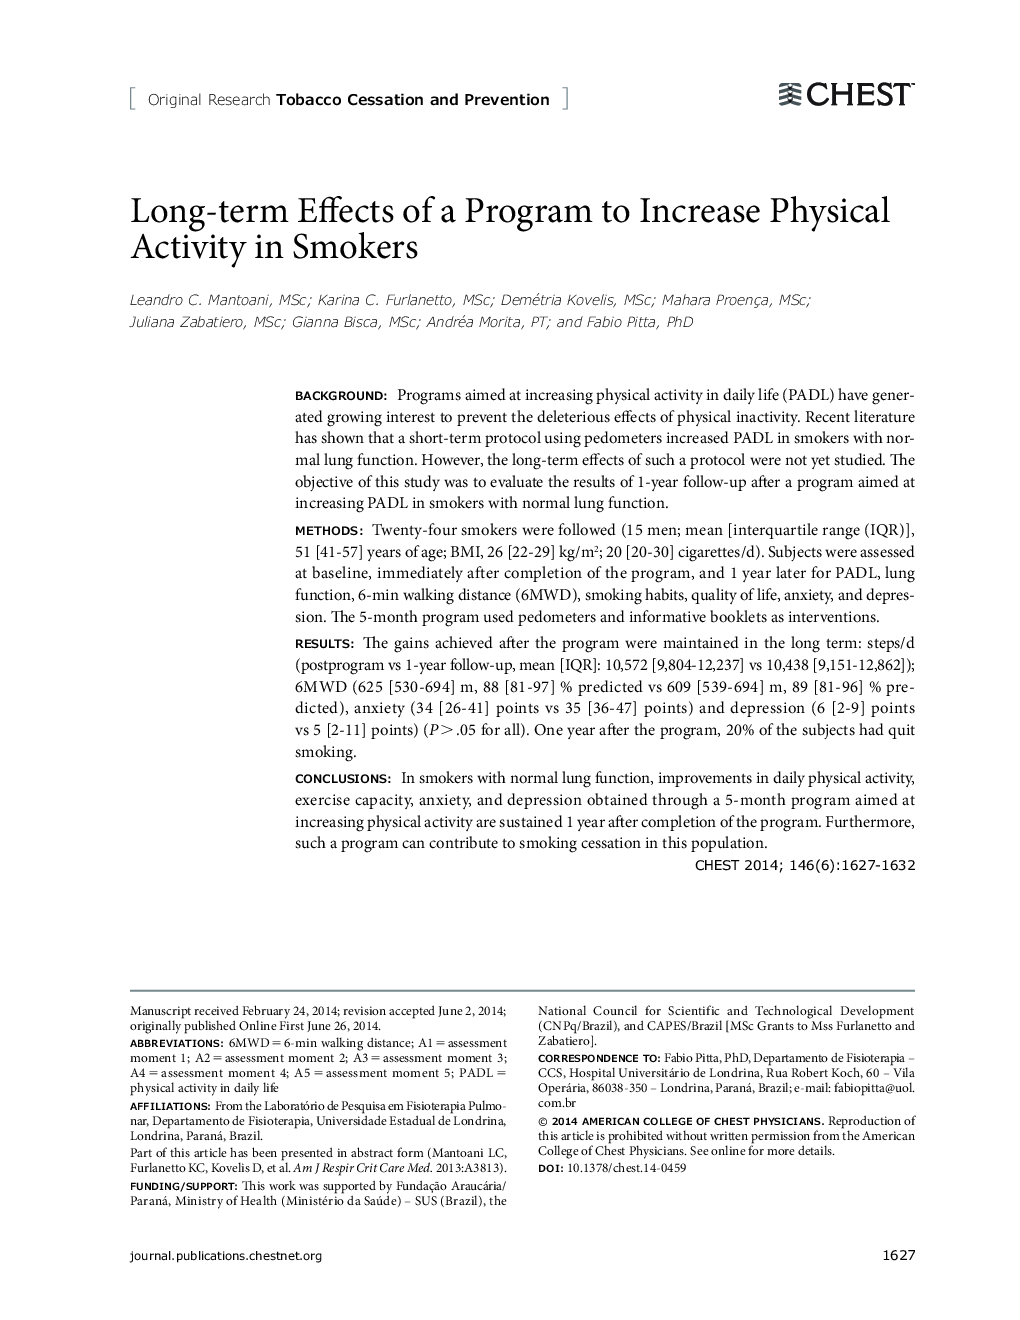 Long-term Effects of a Program to Increase Physical Activity in Smokers